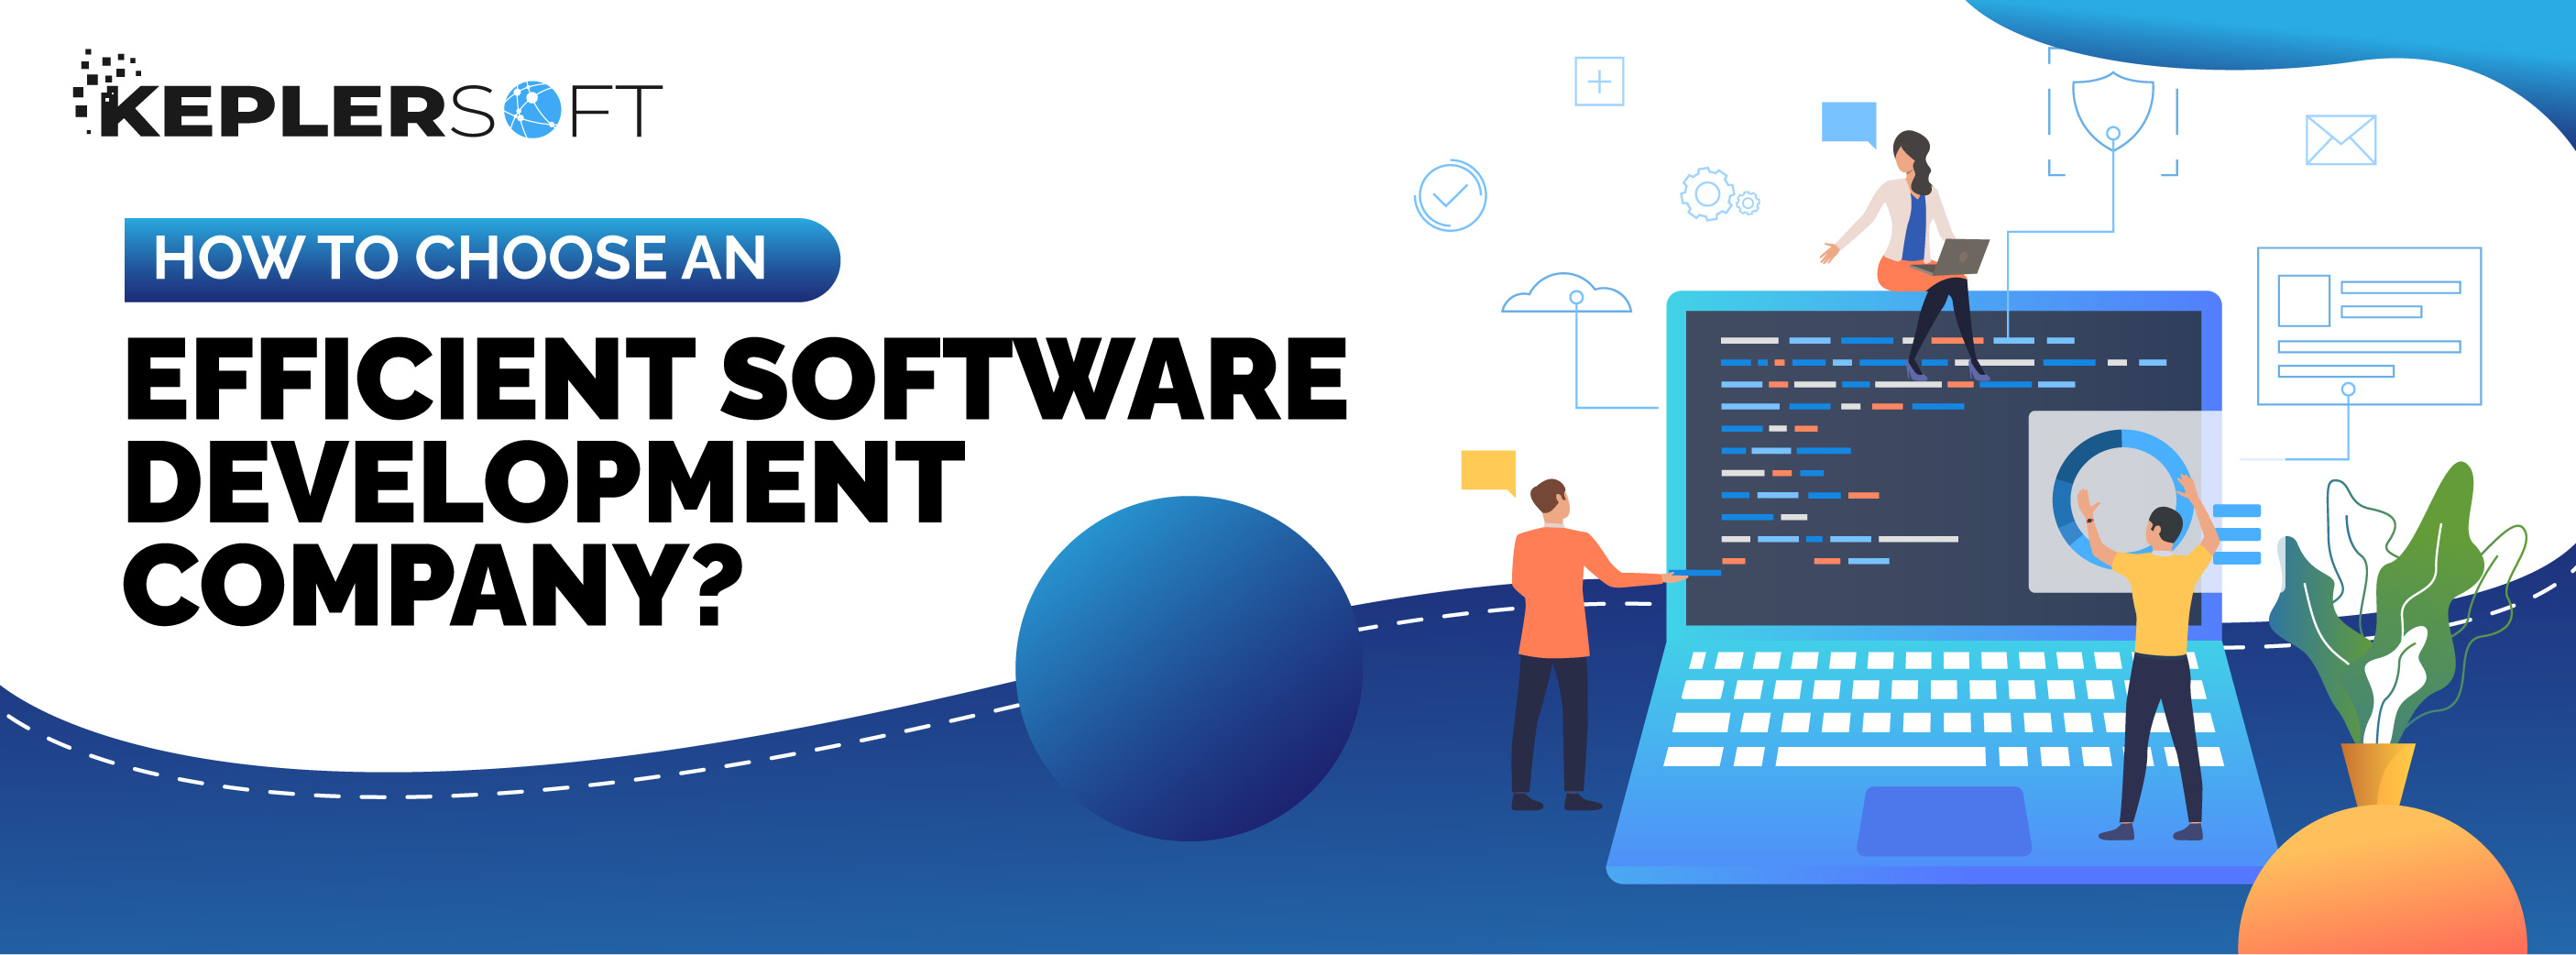 How To Choose an Efficient Software Development Company?